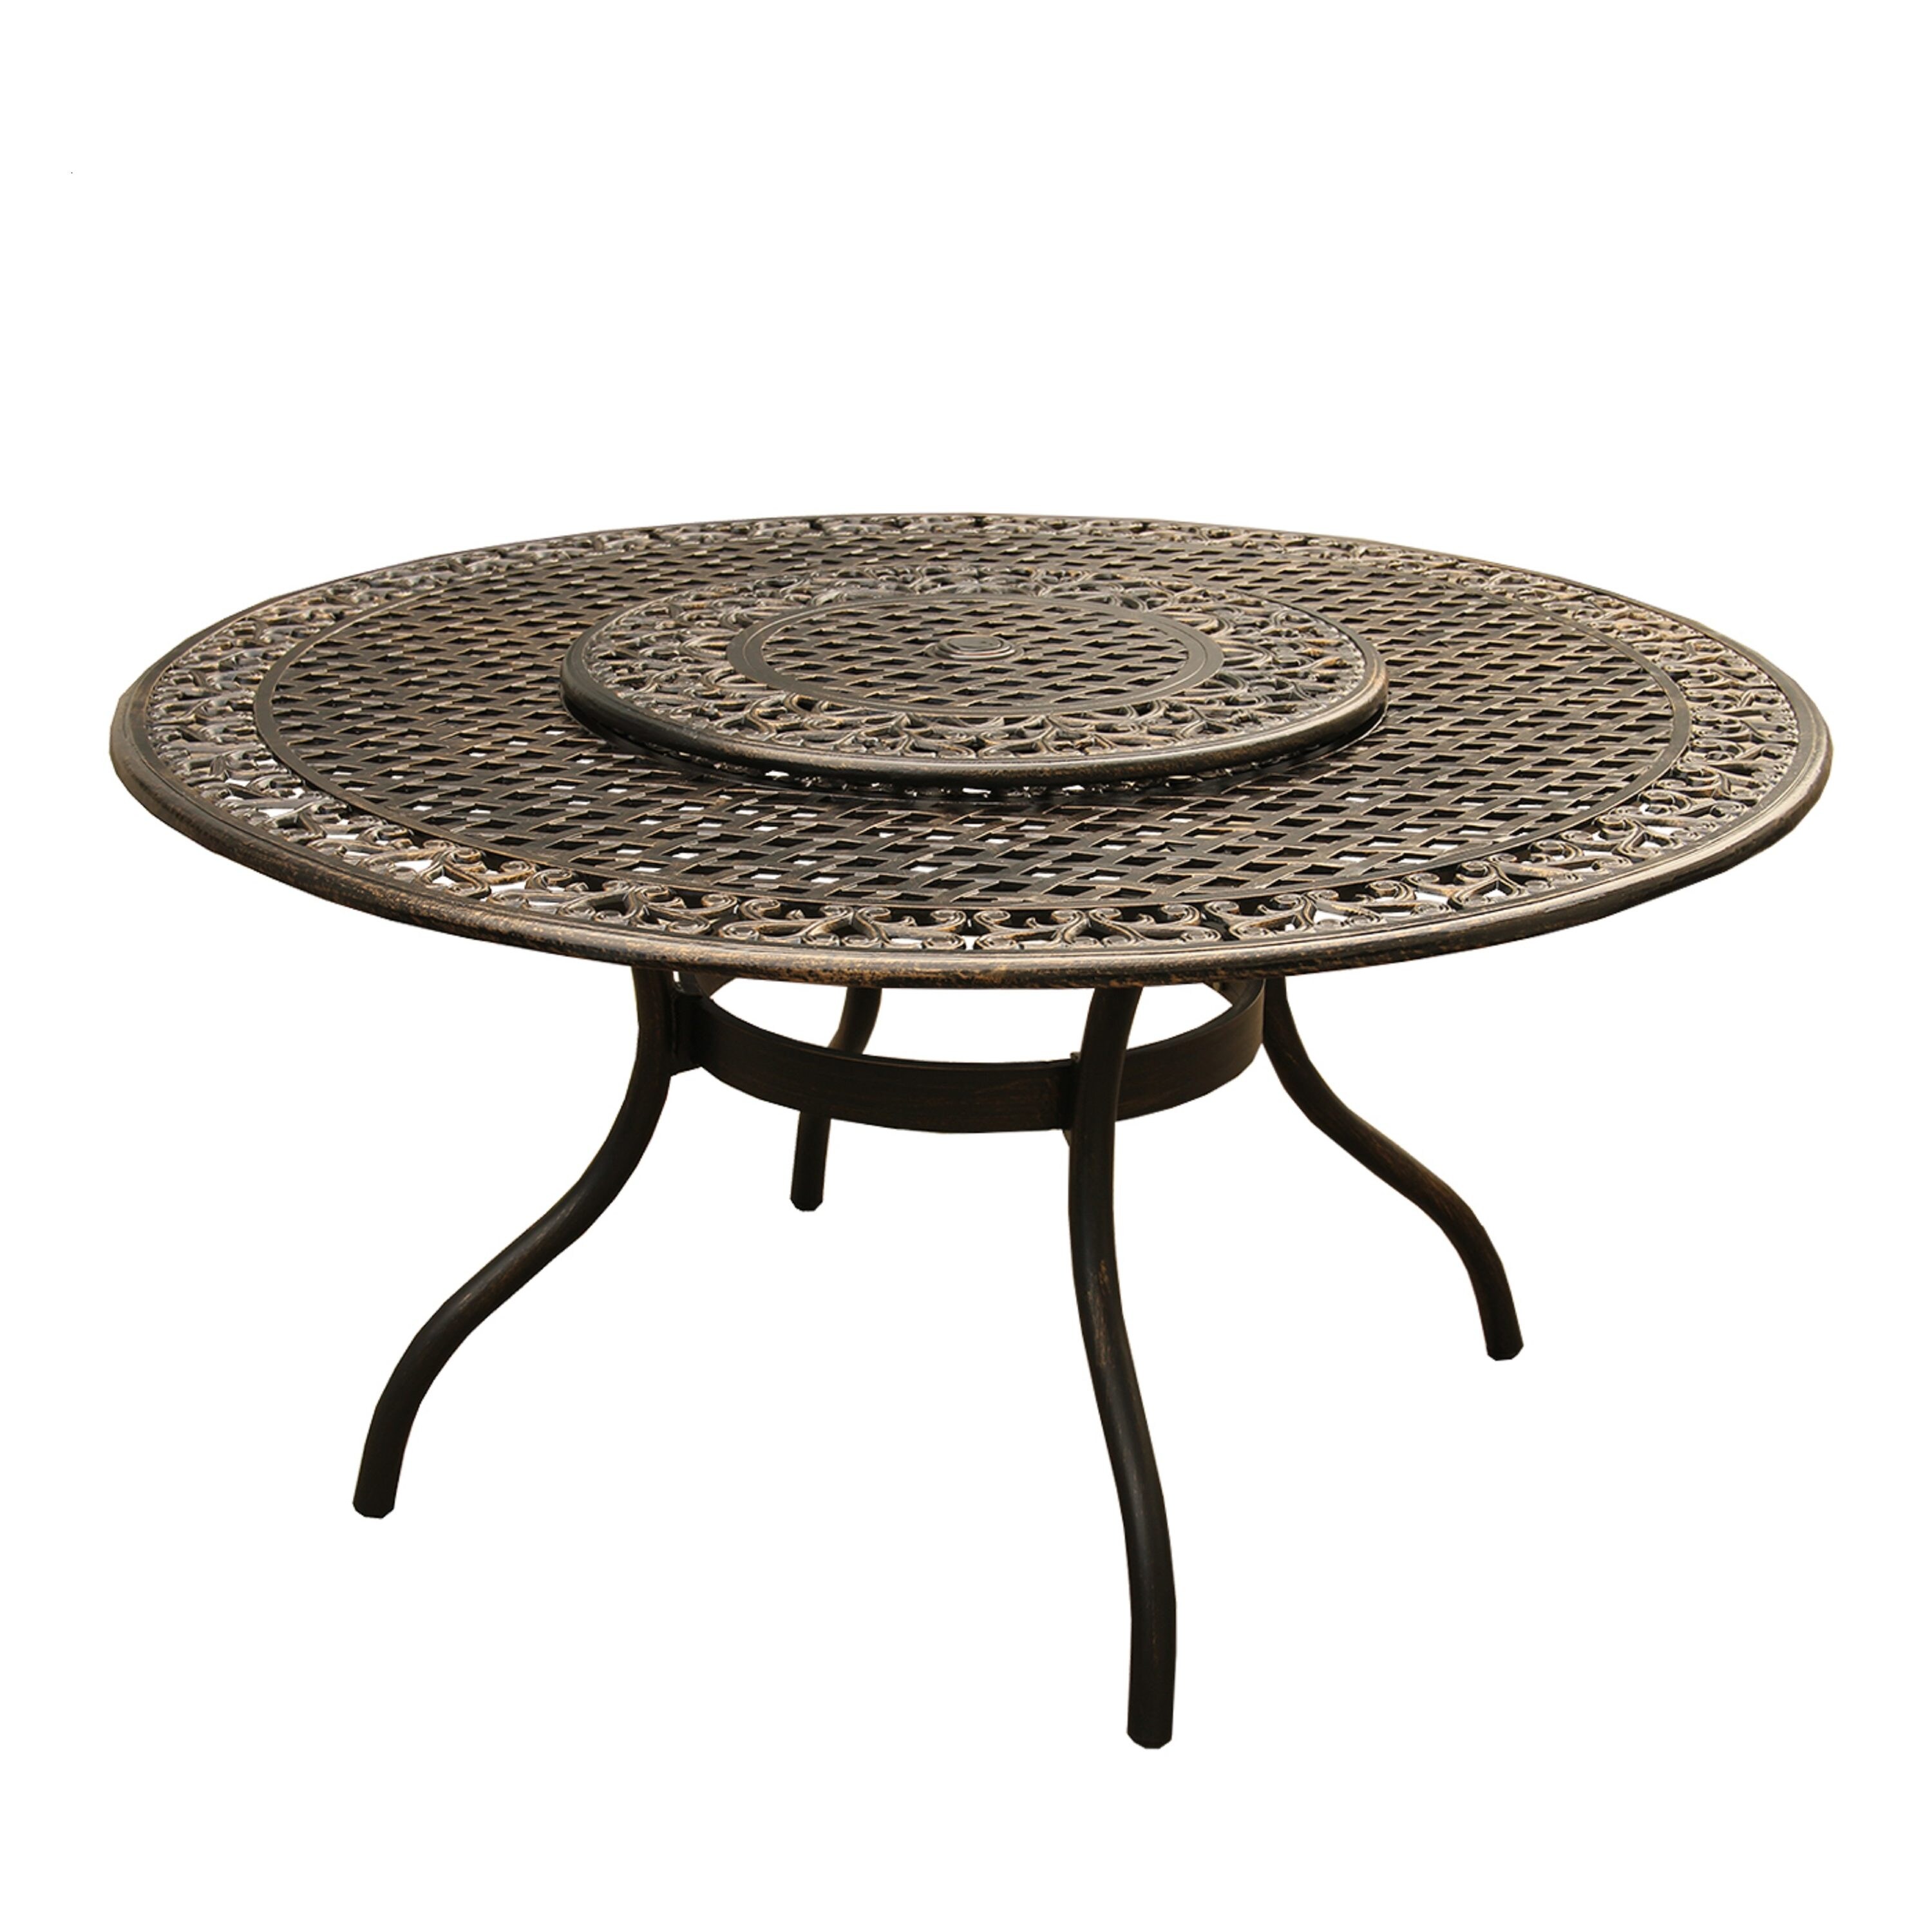 Outdoor Dining Table Patio Aluminum Weather Resistant Round Commercial Grade 